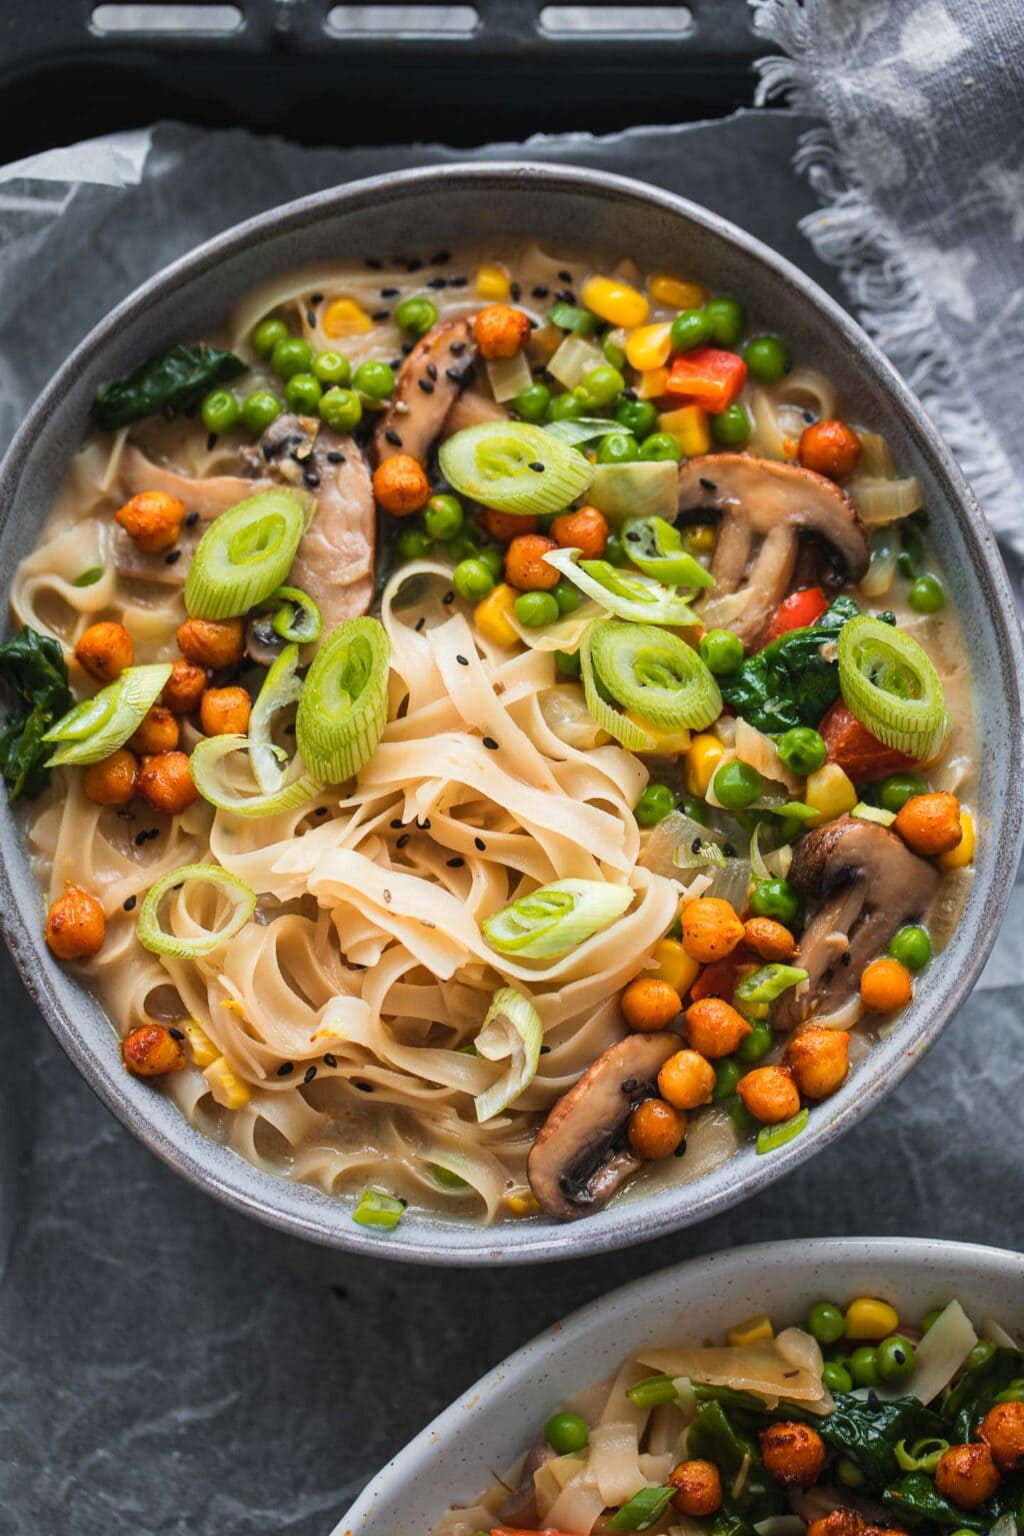 Vegan Noodle Soup With Roasted Chickpeas | Earth of Maria